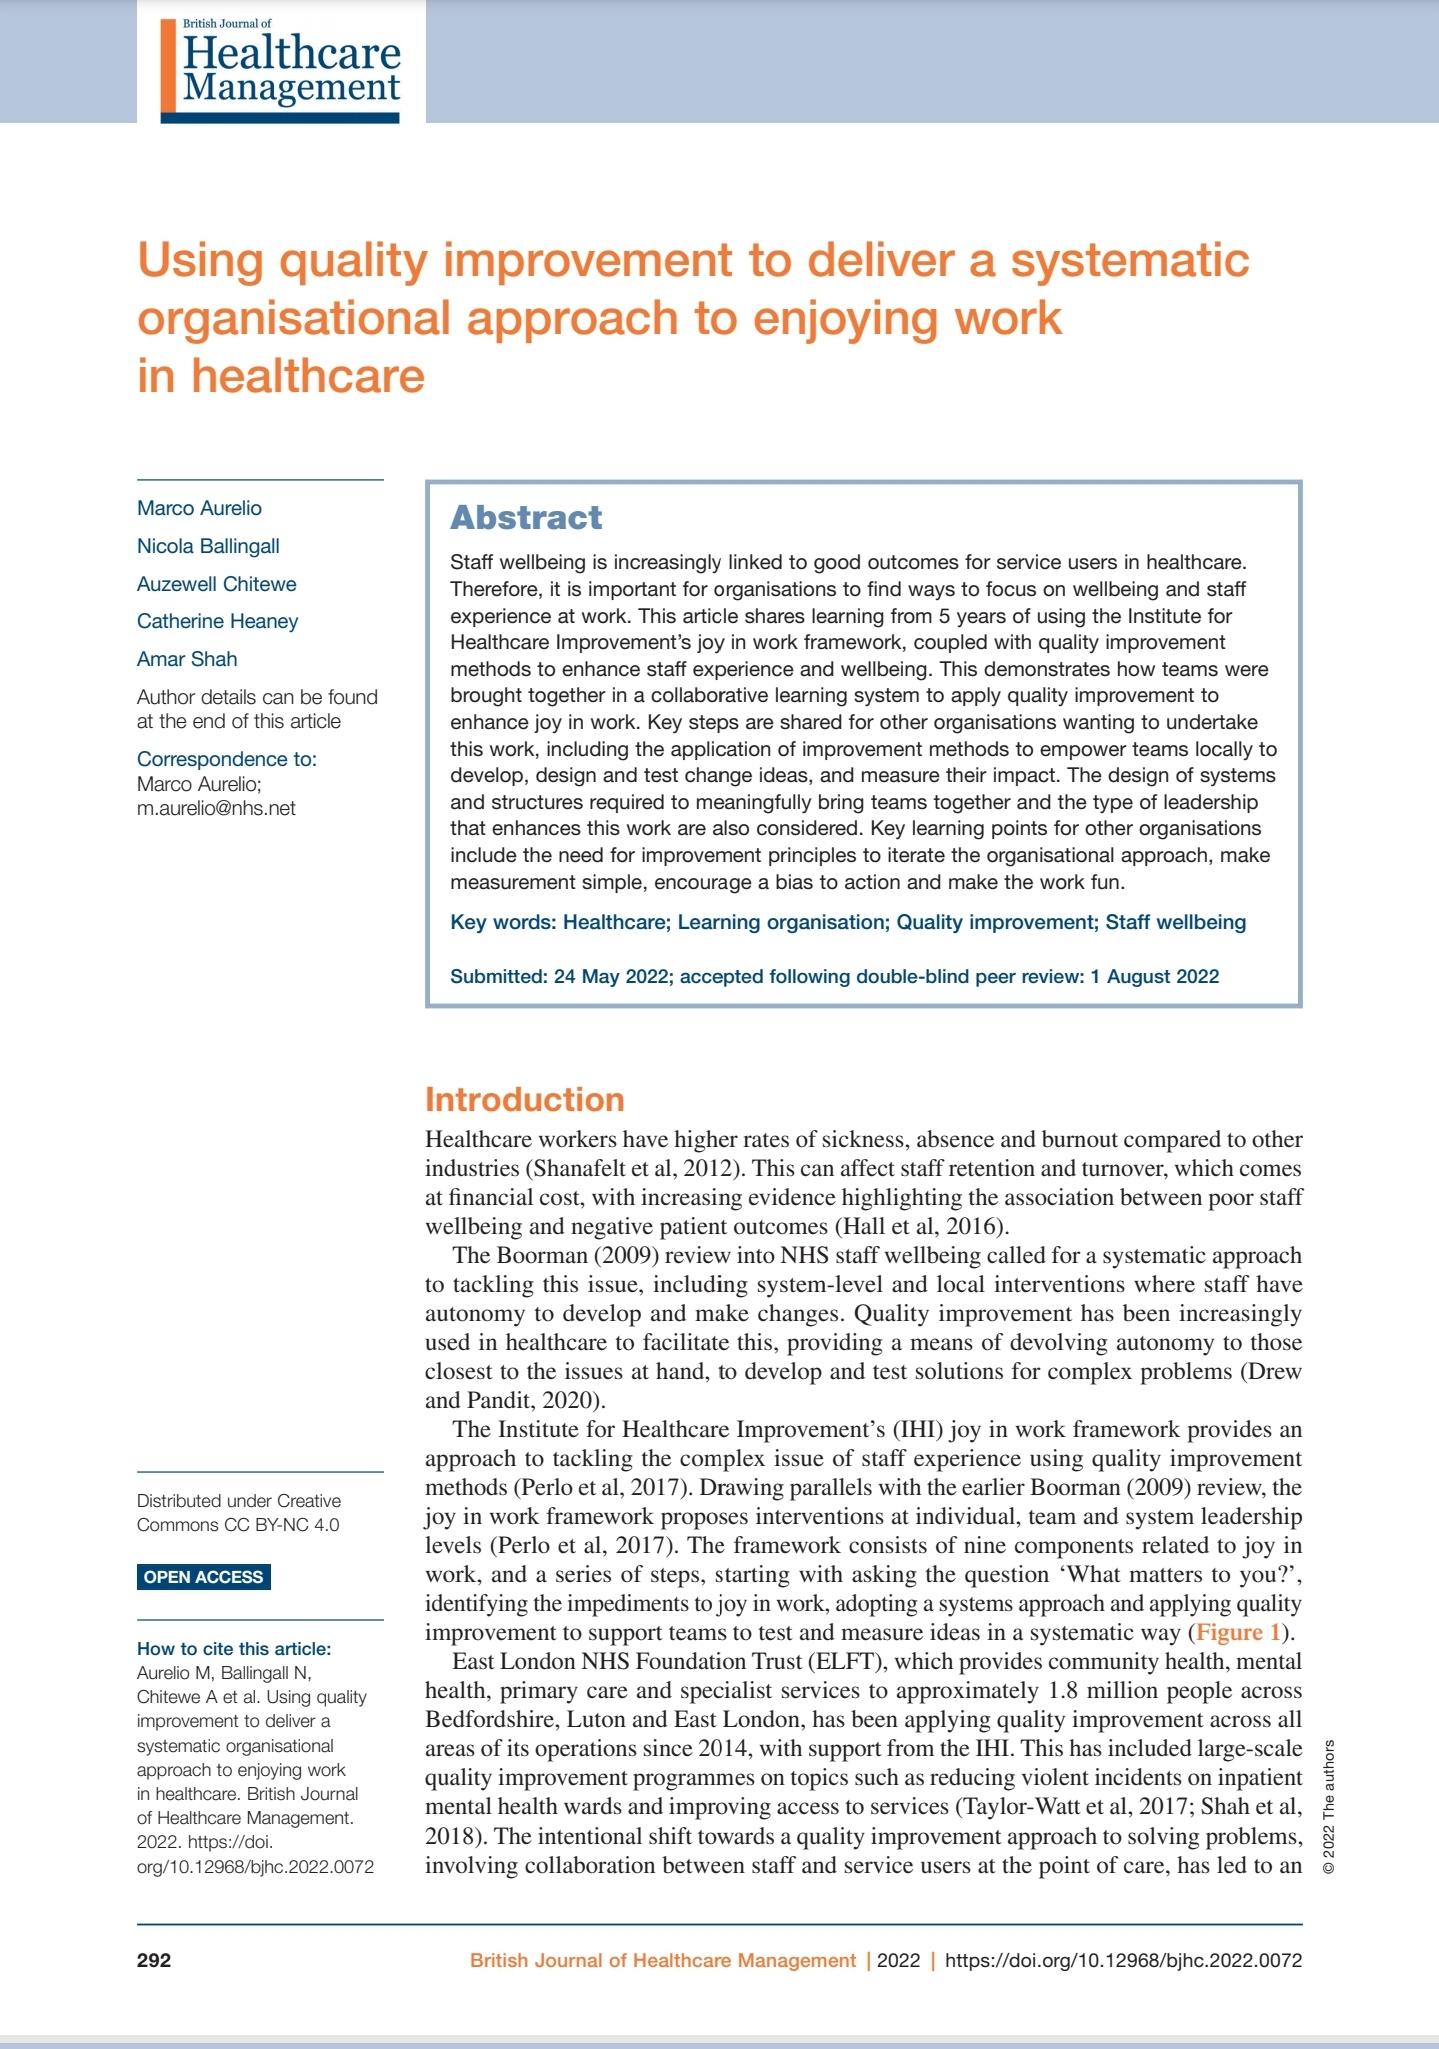 Using Quality Improvement to deliver a systematic organisational approach to enjoying work in healthcare